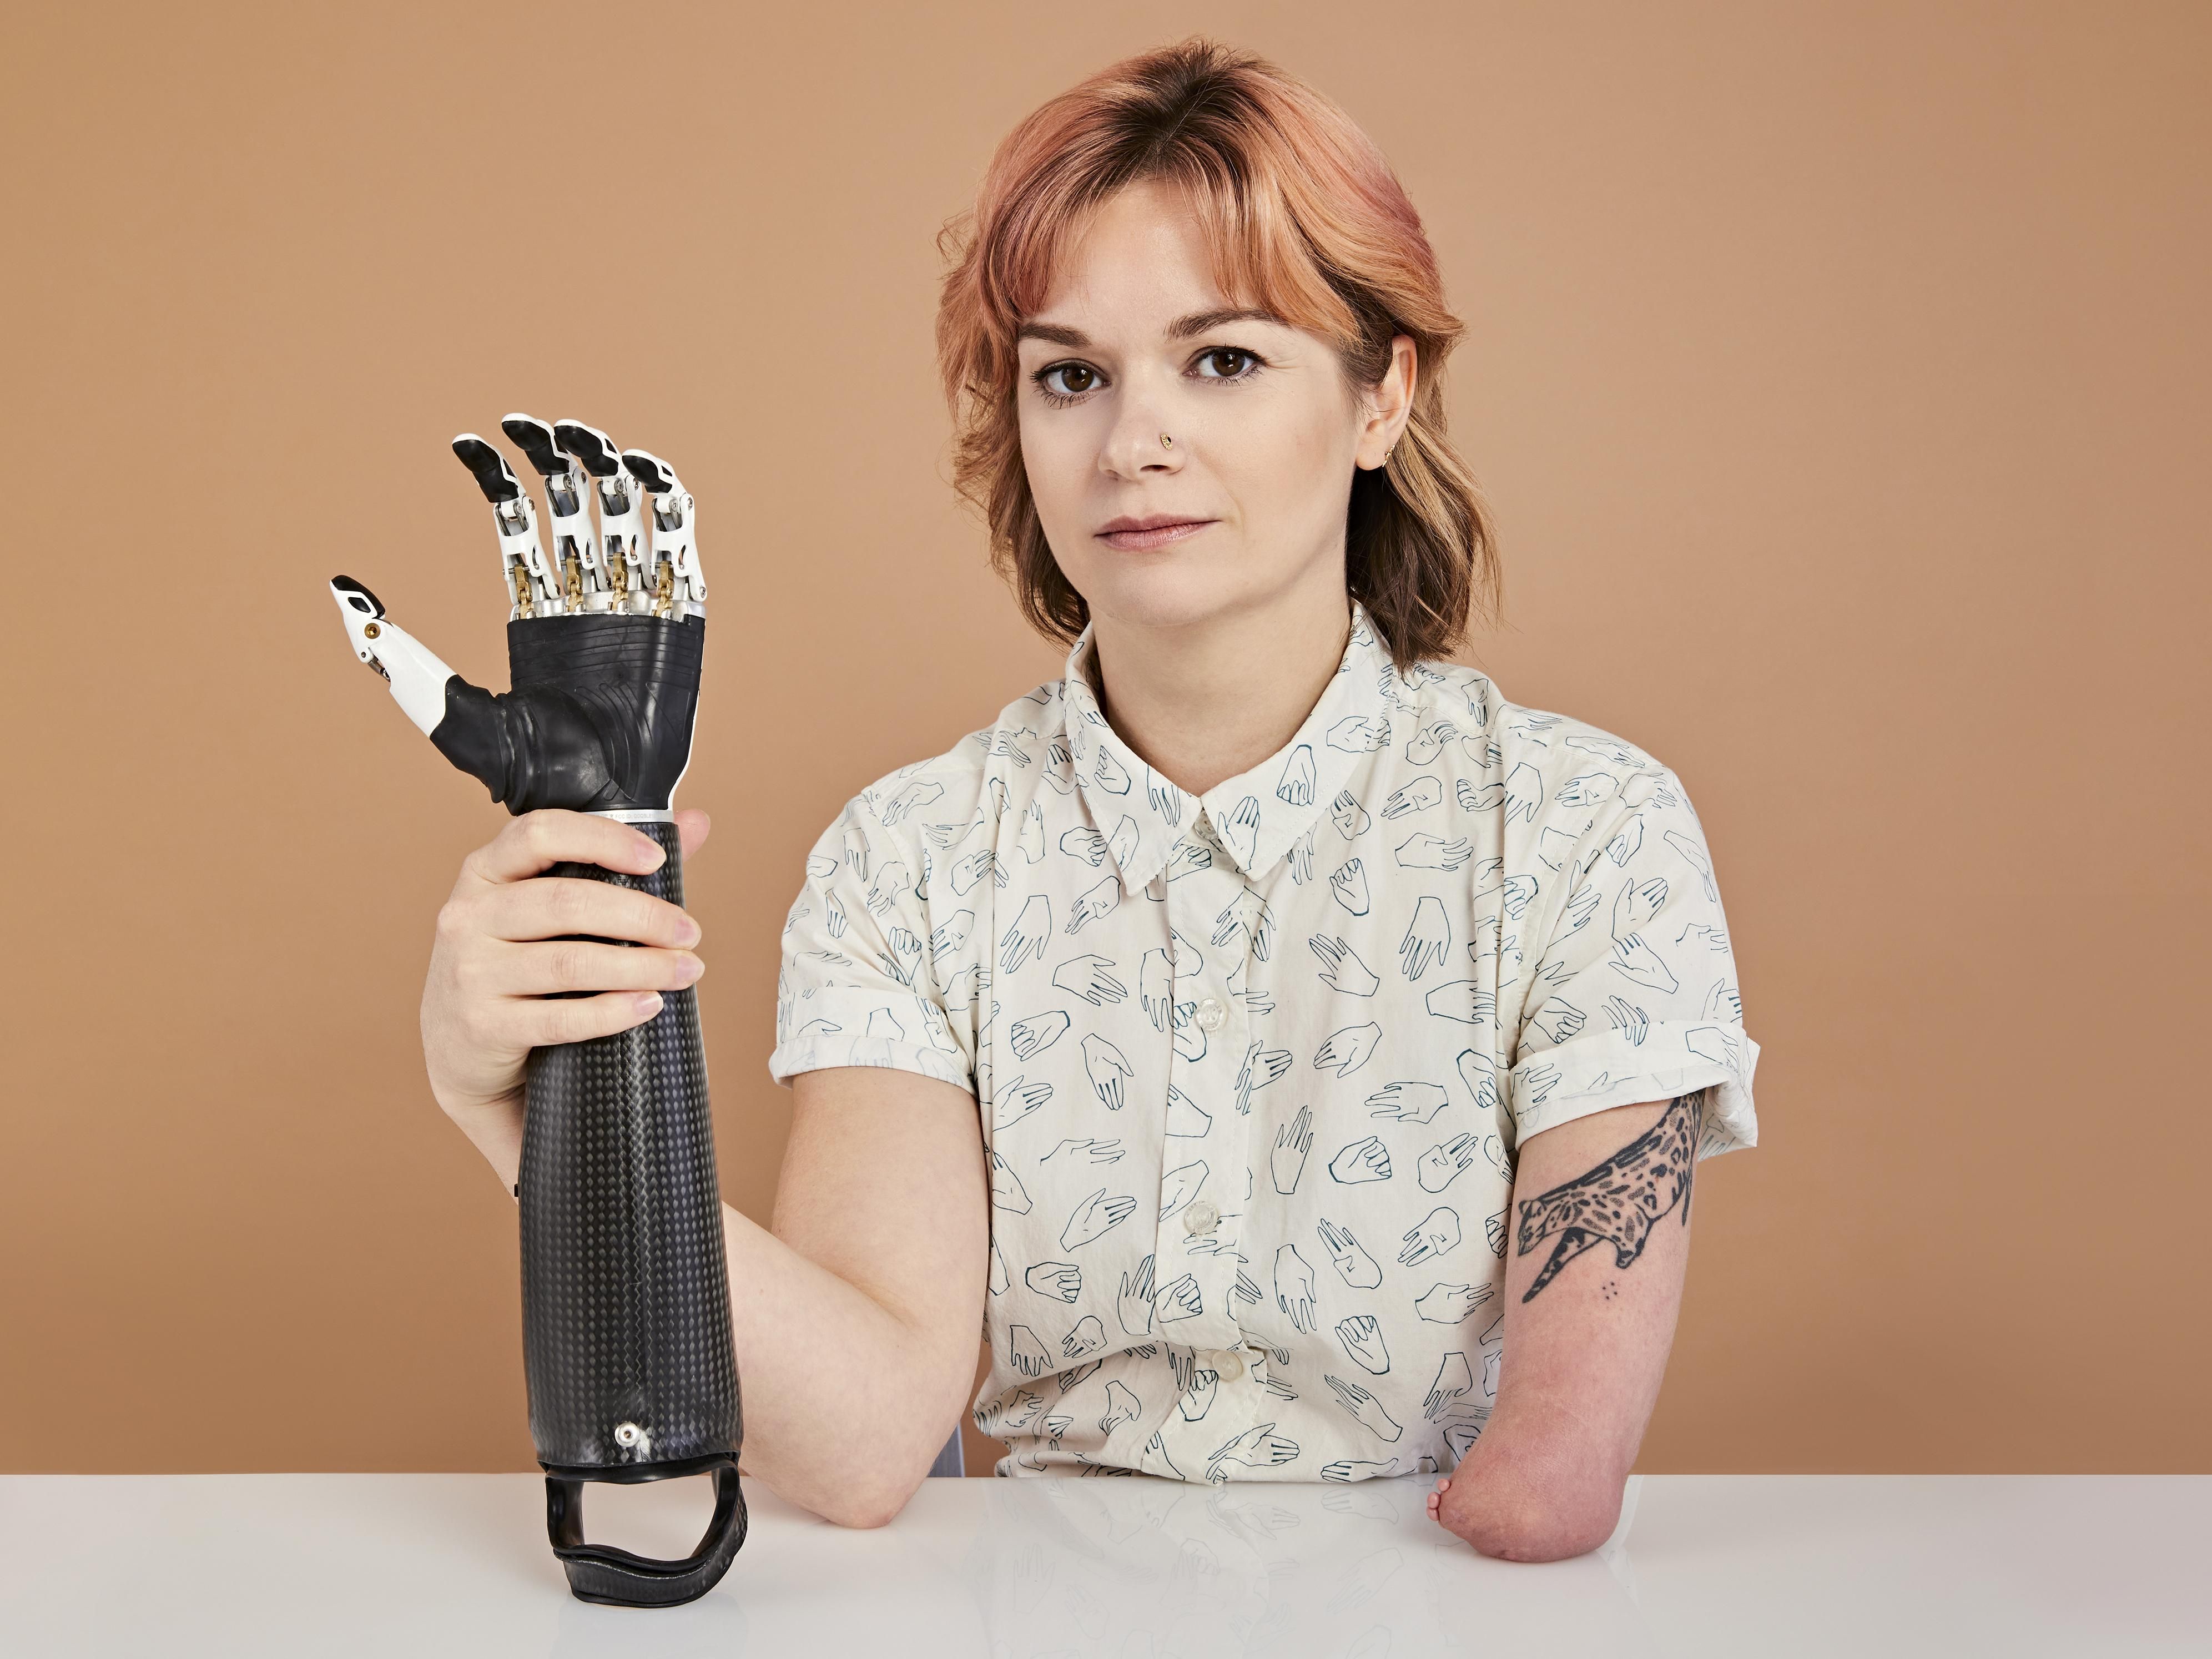 less-than-p-greater-than-the-author-britt-young-holding-her-ottobock-bebionic-bionic-arm-less-than-p-greater-than.jpg